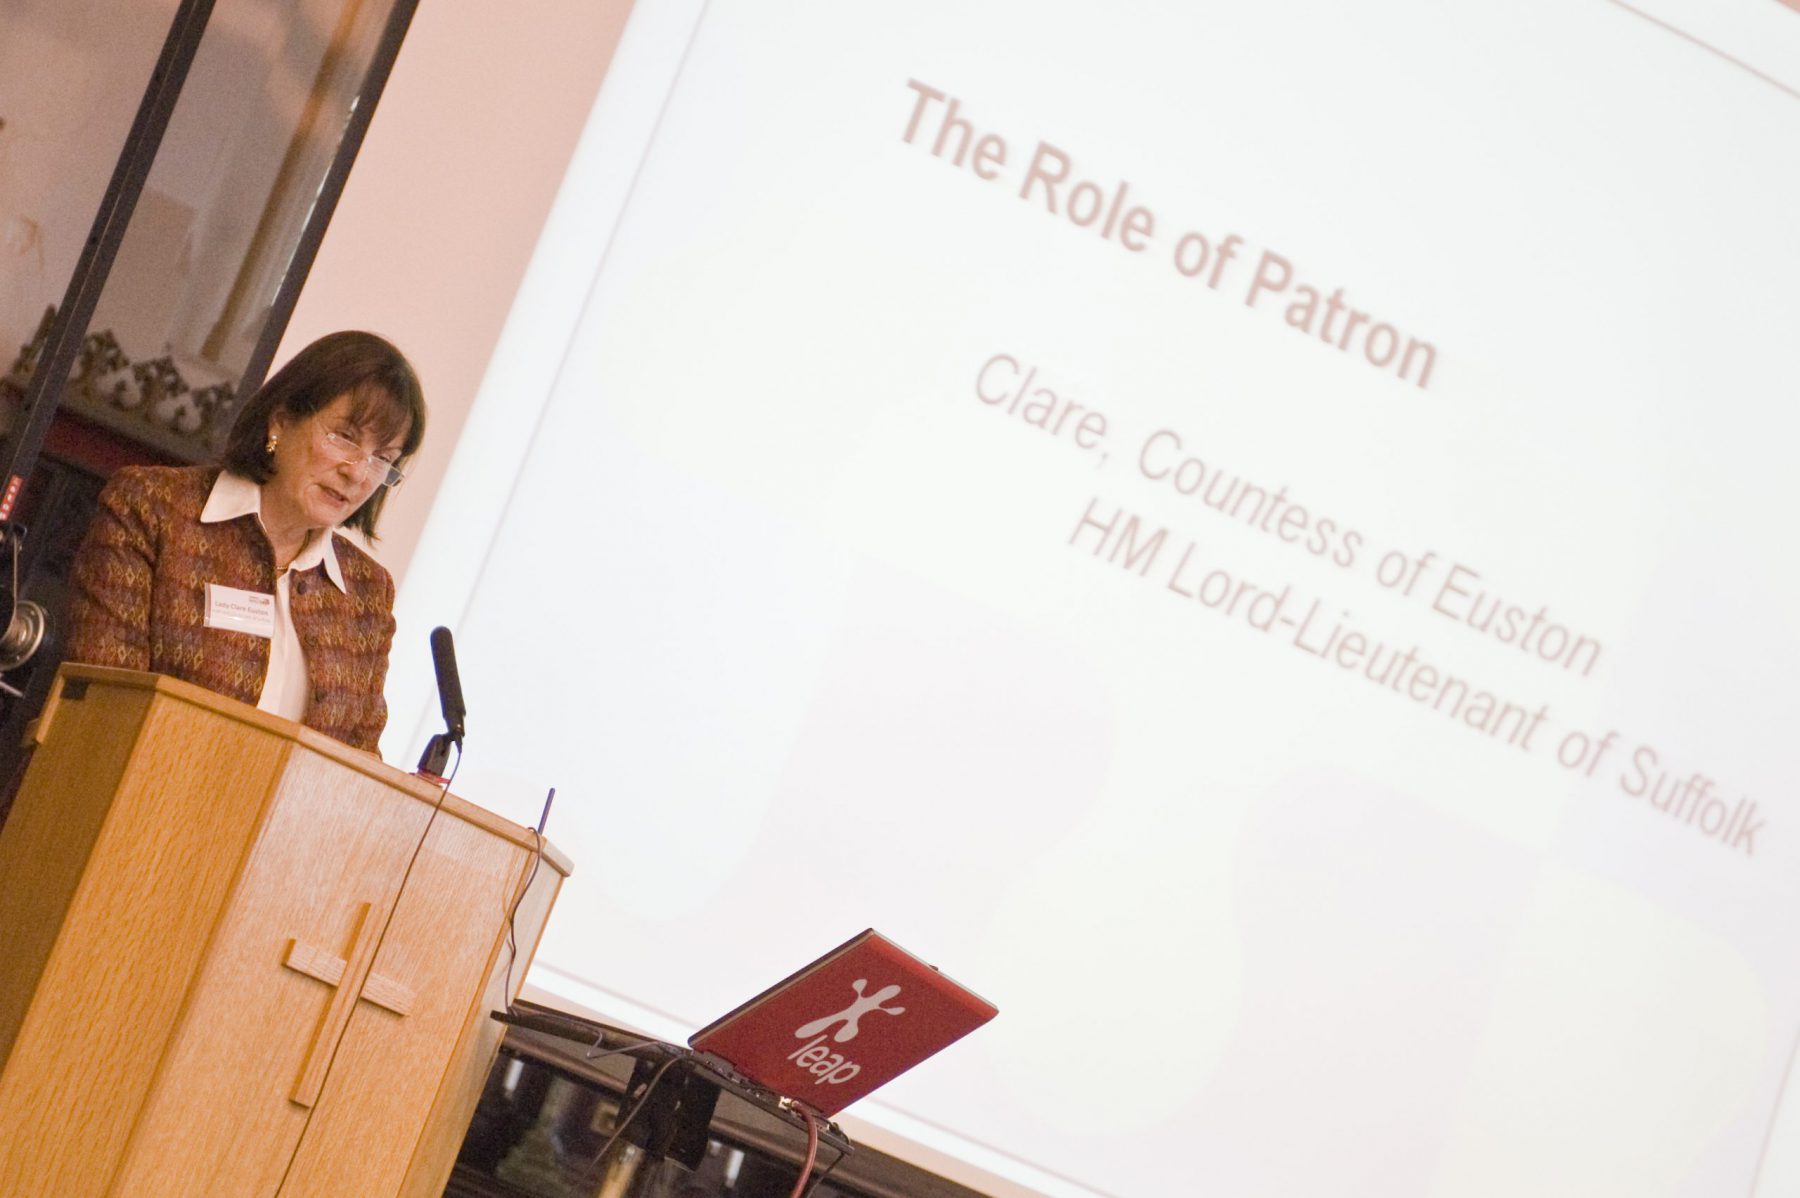 Lady Euston accompanied the Princess Royal on her visit to Lowestoft (seen here speaking at the CAS Annual Review and Celebration event, October 2015)